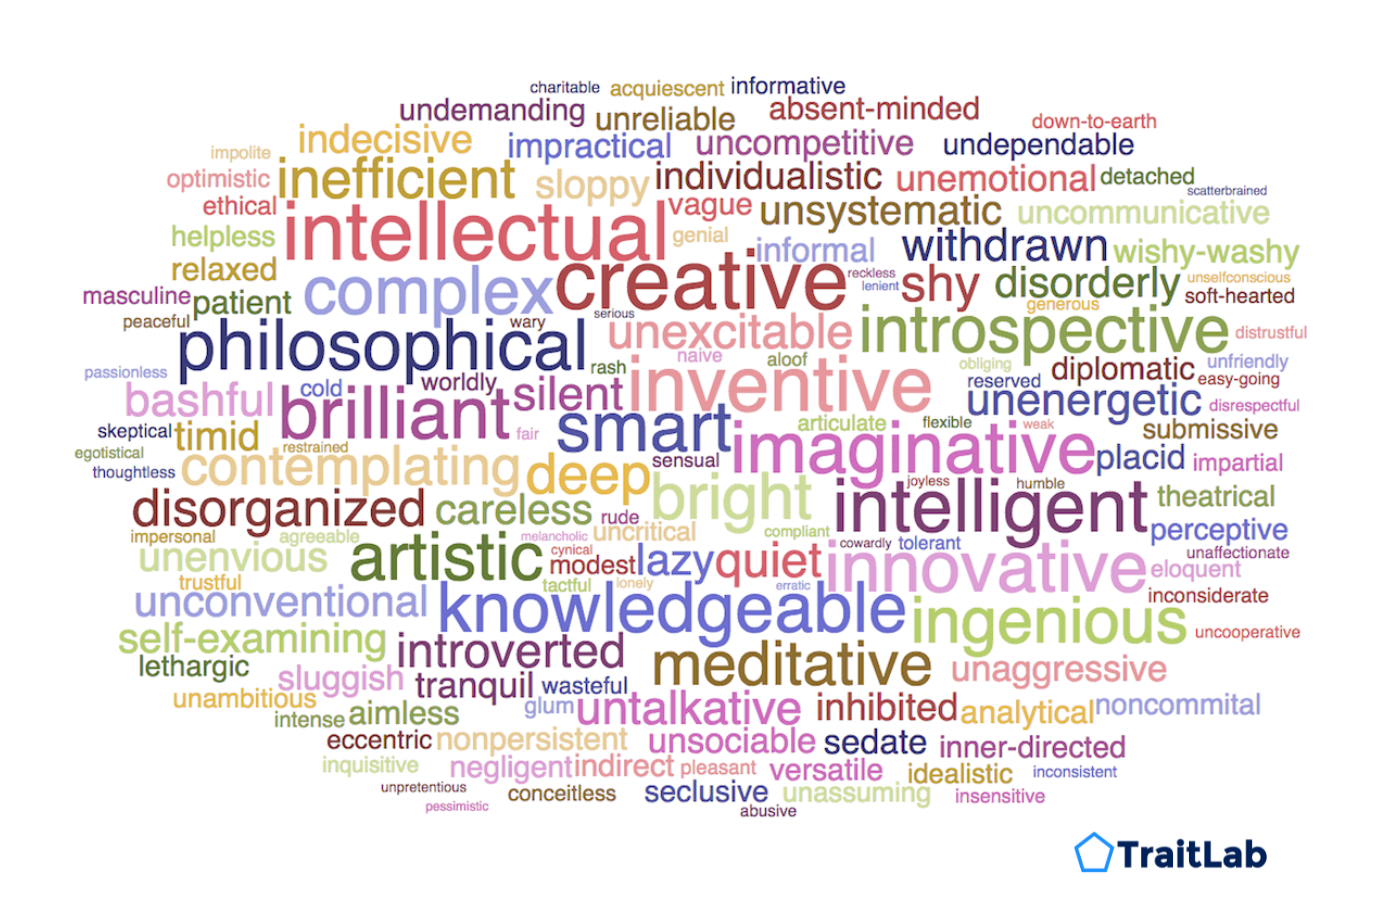 A wordcloud visualization showing up to 100 words describing a personality.